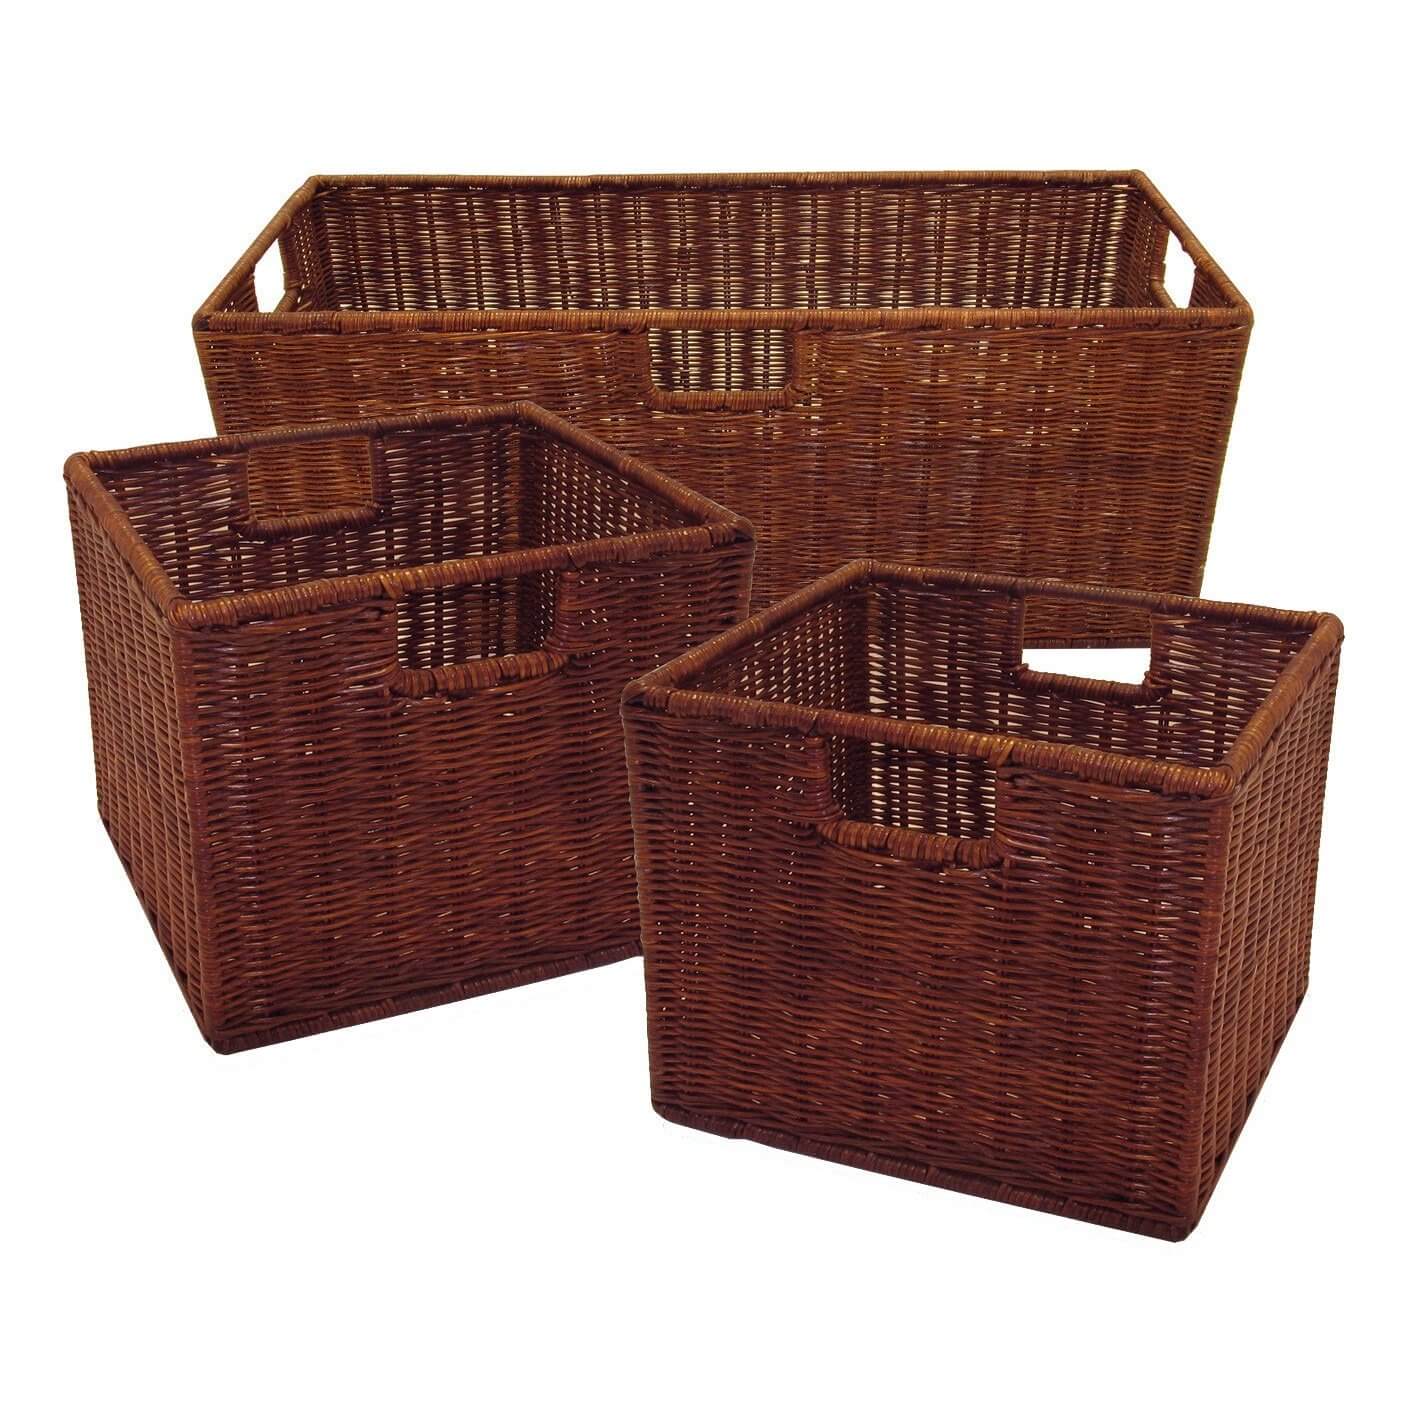 15 minute cleanup products, decorative woven baskets